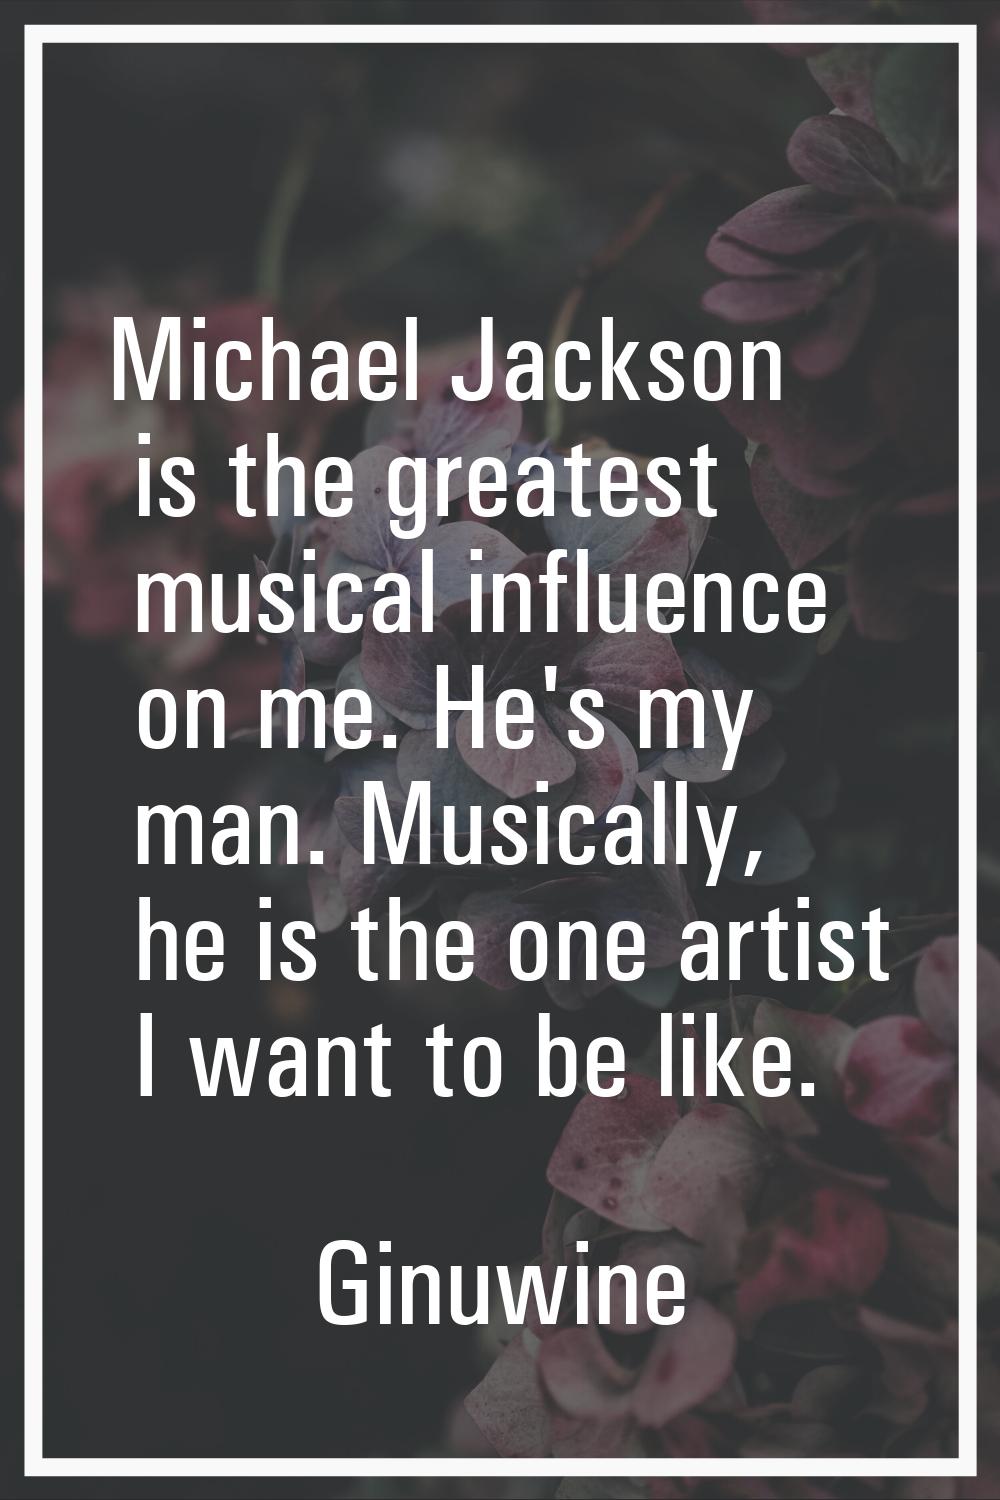 Michael Jackson is the greatest musical influence on me. He's my man. Musically, he is the one arti